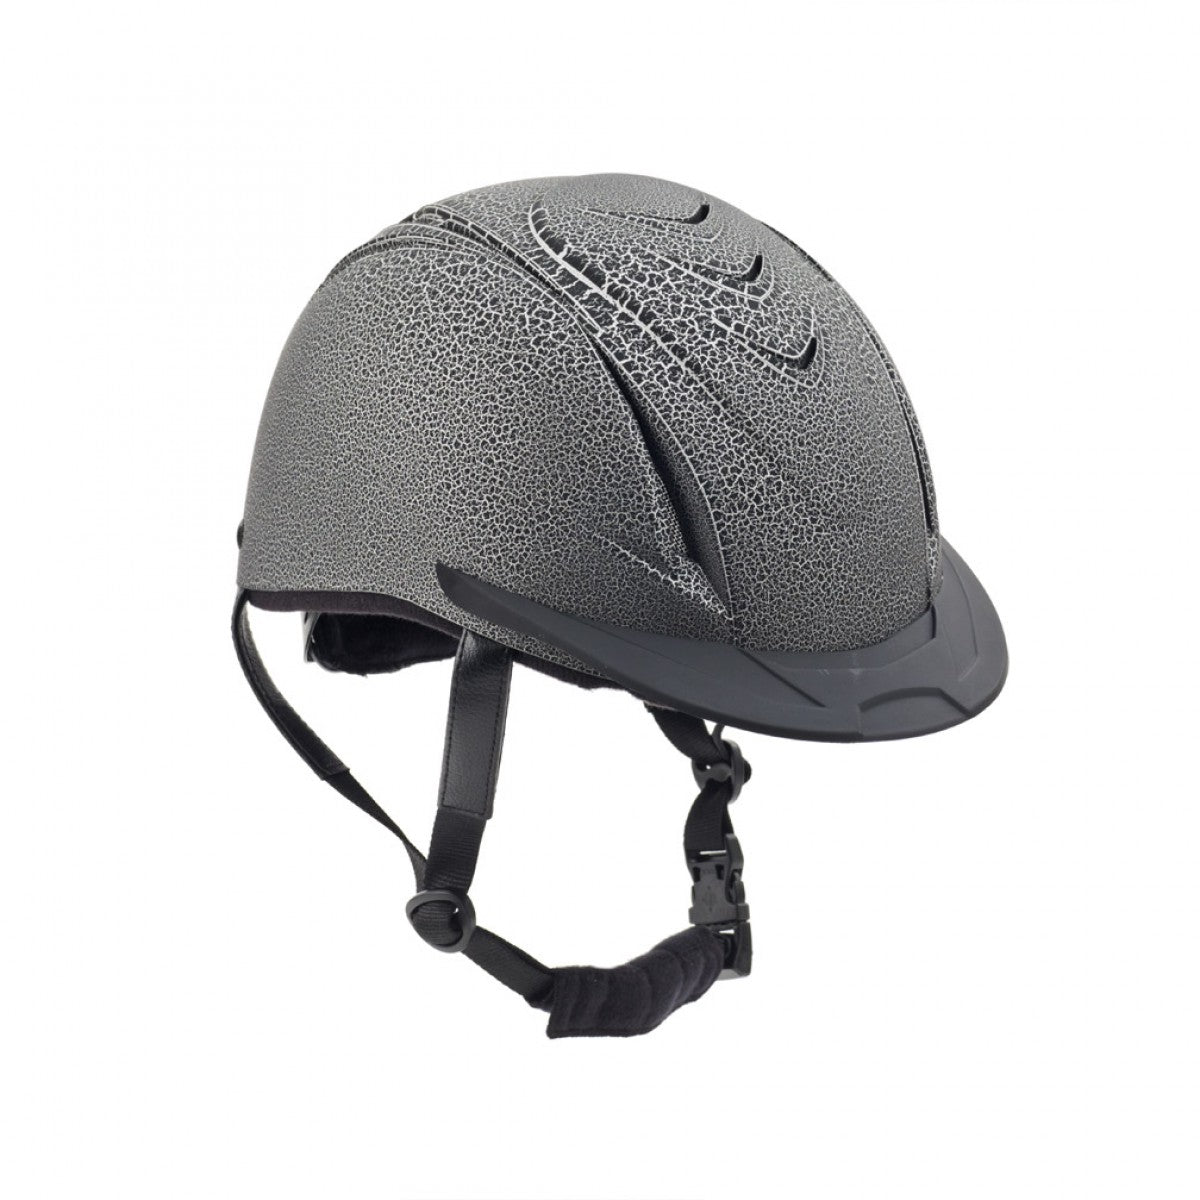 ovation-helmets-info – Outlaw Outfitters